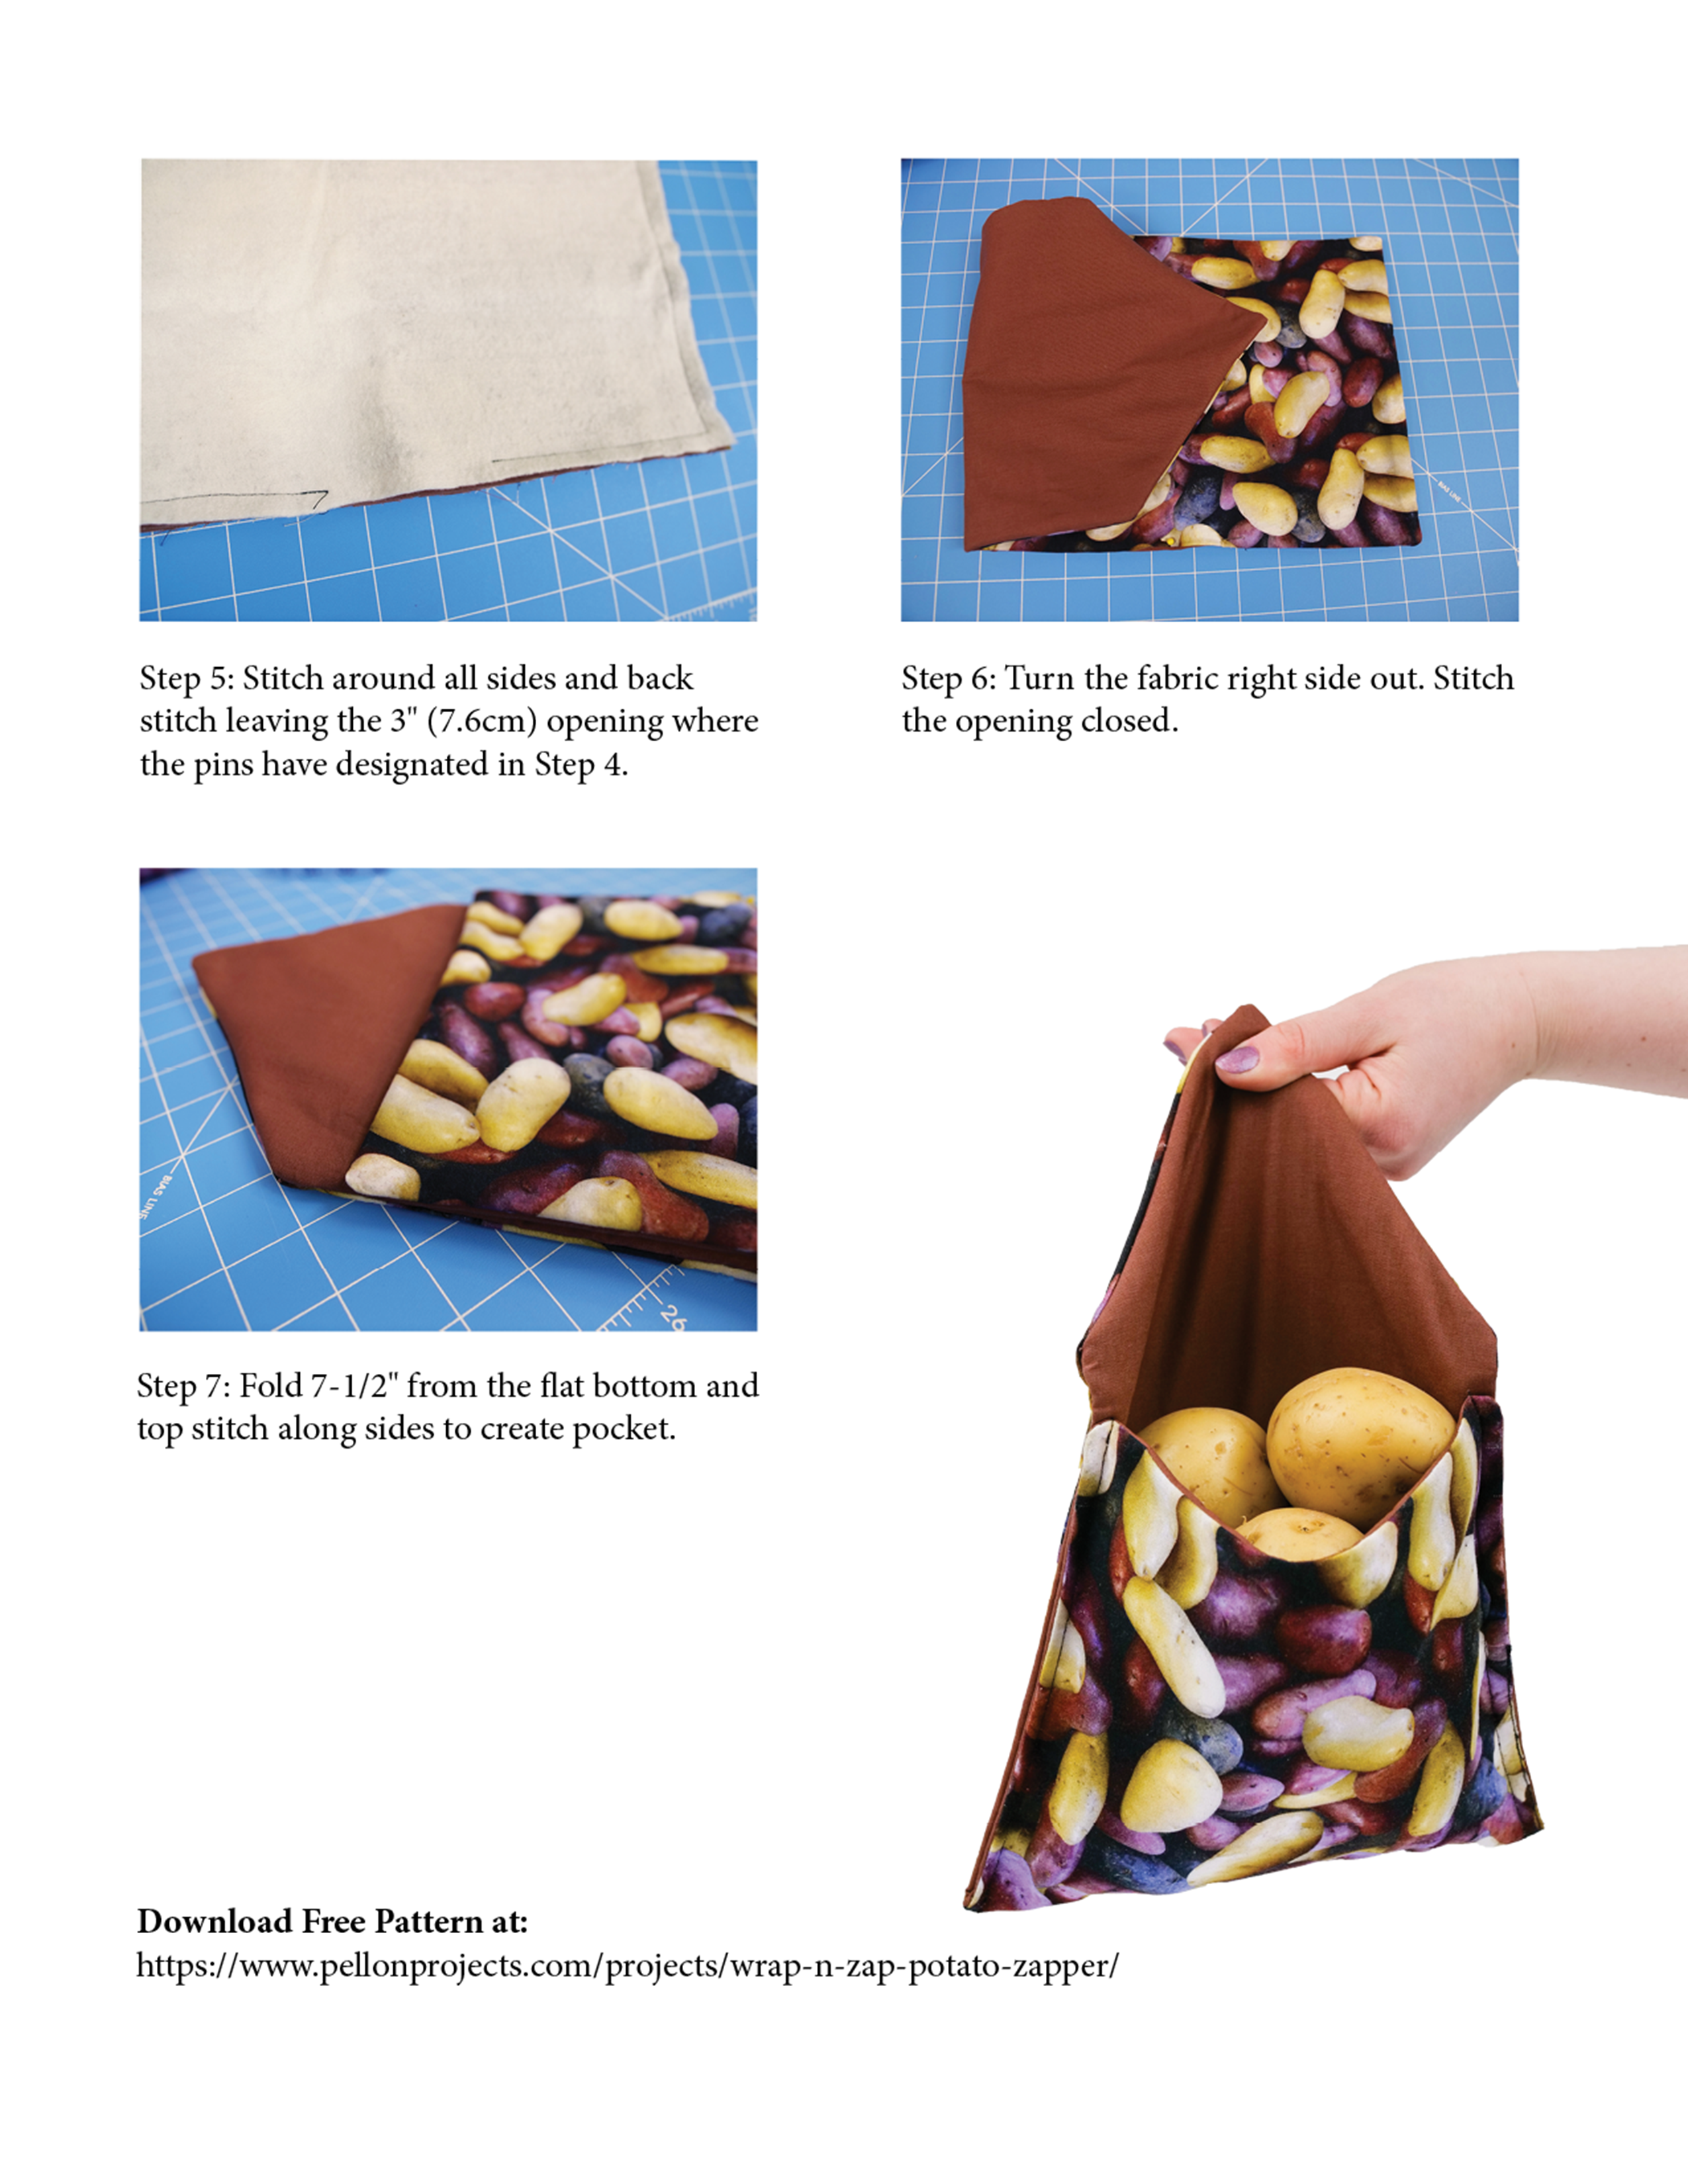 Last set of steps to creating your own  microwave potato bag